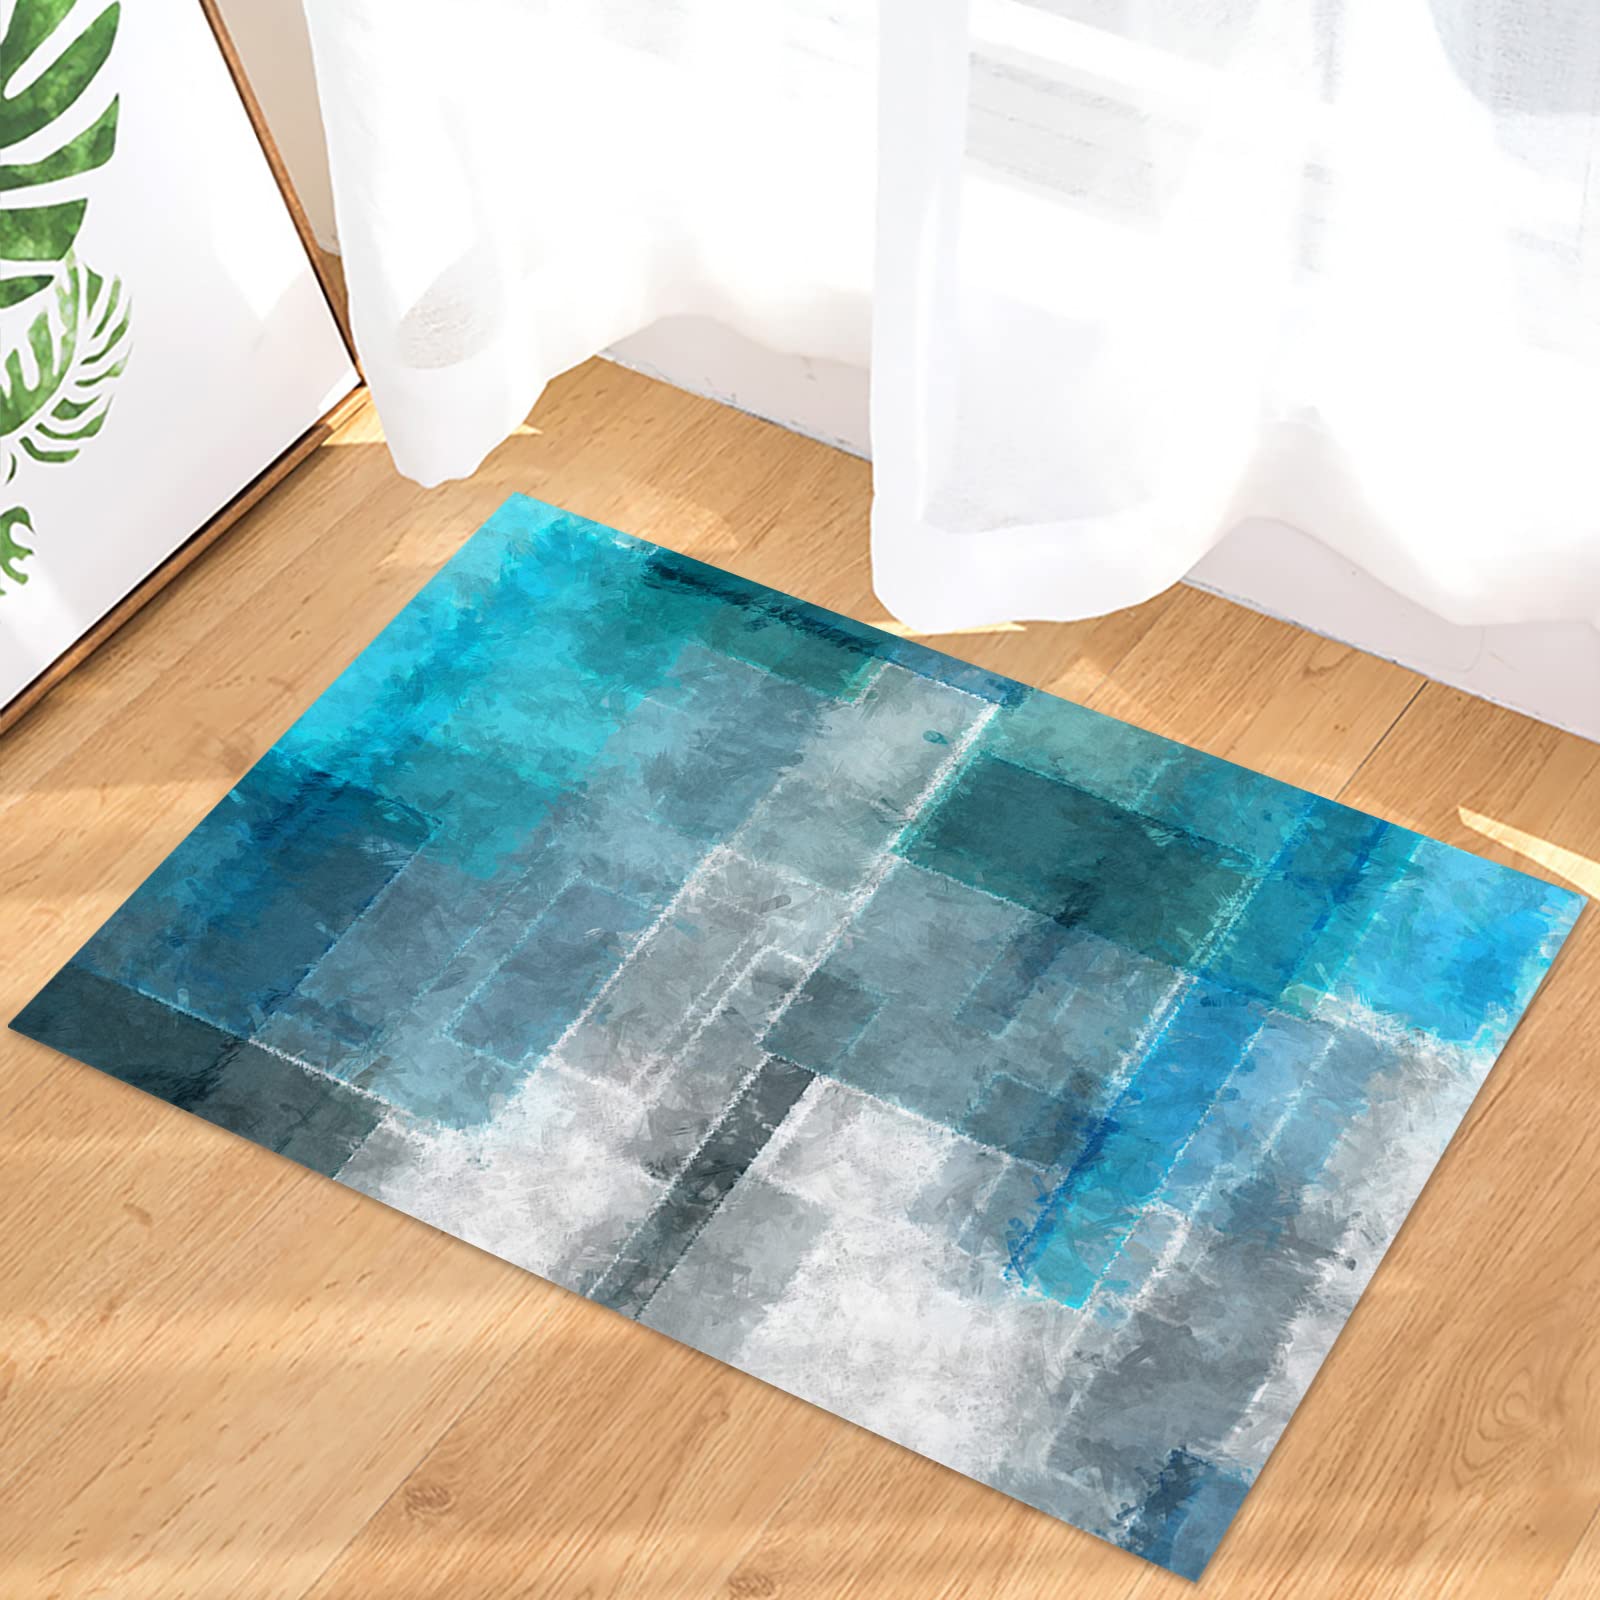 Door Mat for Bedroom Decor, Geometry Turquoise and Grey Abstract Art Painting Blue Floor Mats, Holiday Rugs for Living Room, Absorbent Non-Slip Bathroom Rugs Home Decor Kitchen Mat Area Rug 18x30 Inch